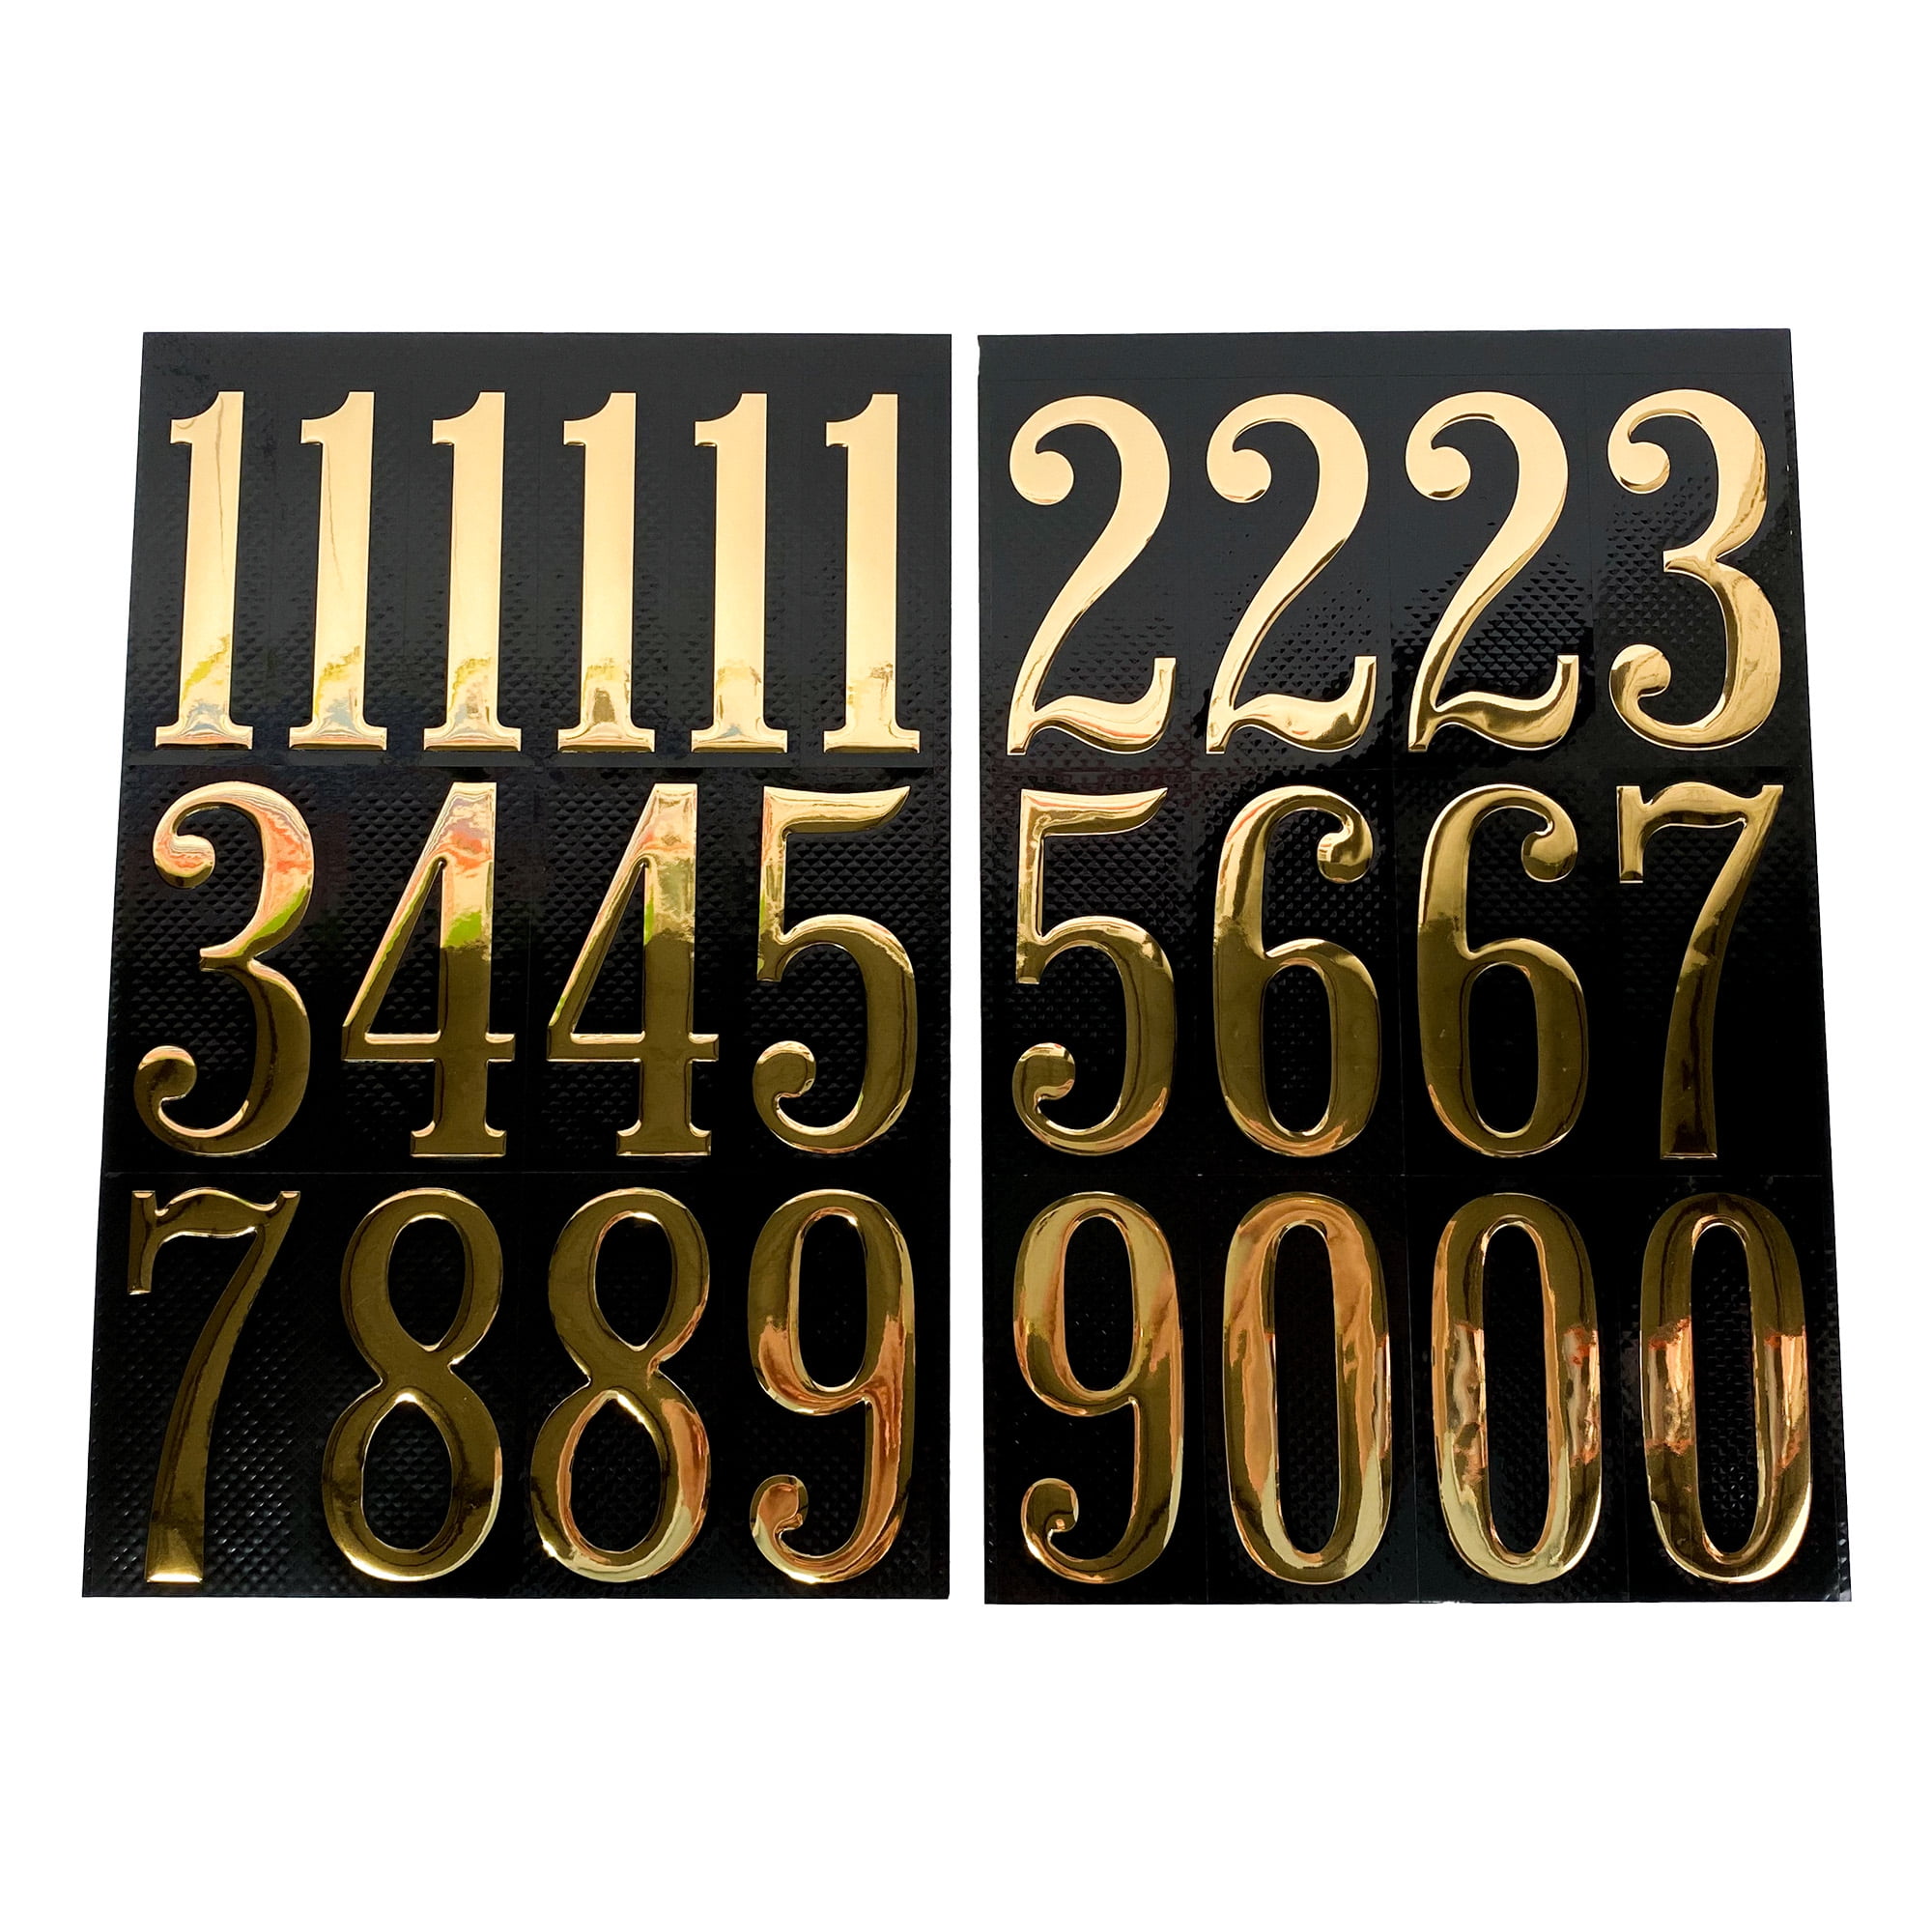 1 Metallic Gold Color, Classic Style Mailbox Numbers,Lot of 40 (4 of Each Number Form 0 to 9) 1 inch Tall, Vinyl Mailbox Numbers,Doors,Tool Box